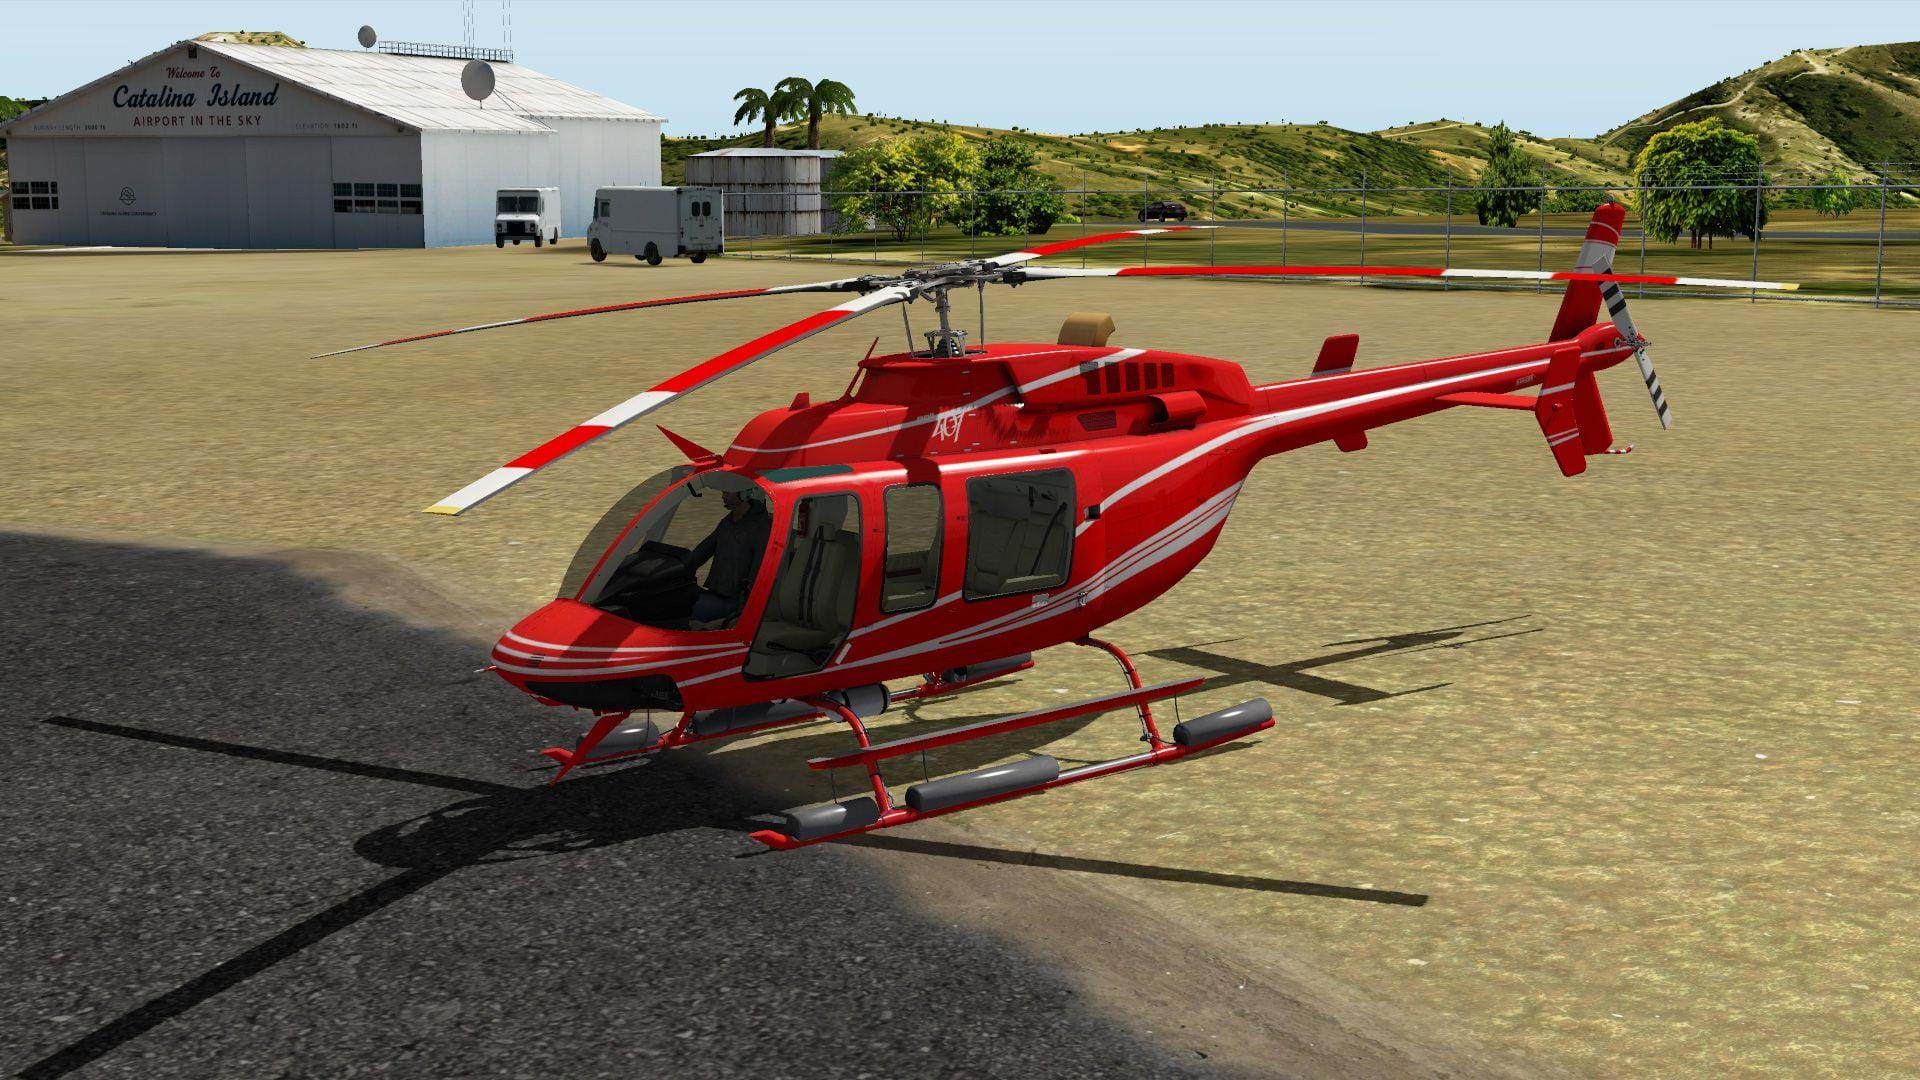 Flight Simulator now has a working helicopter add-on